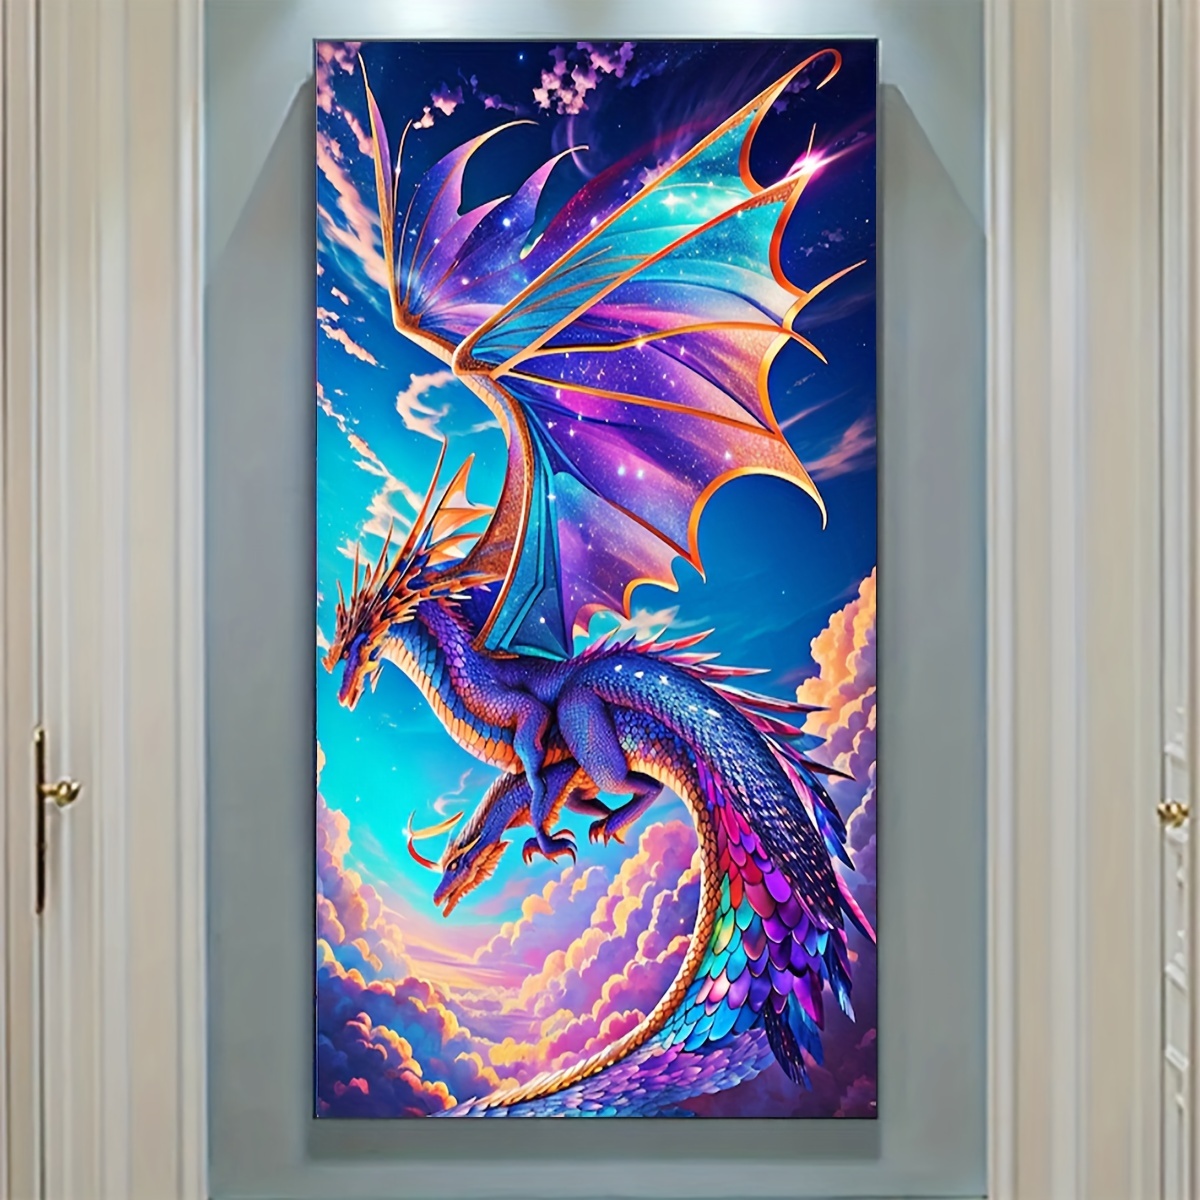  Adult Diamond Painting Kits White Dragon and Black Dragon -  Full Diamond Canvas DIY Sparkling Gemstone Art Painting Stress Relief  Crafts For Family Interactive Room Decor Bathroom Decor(18x25inch)